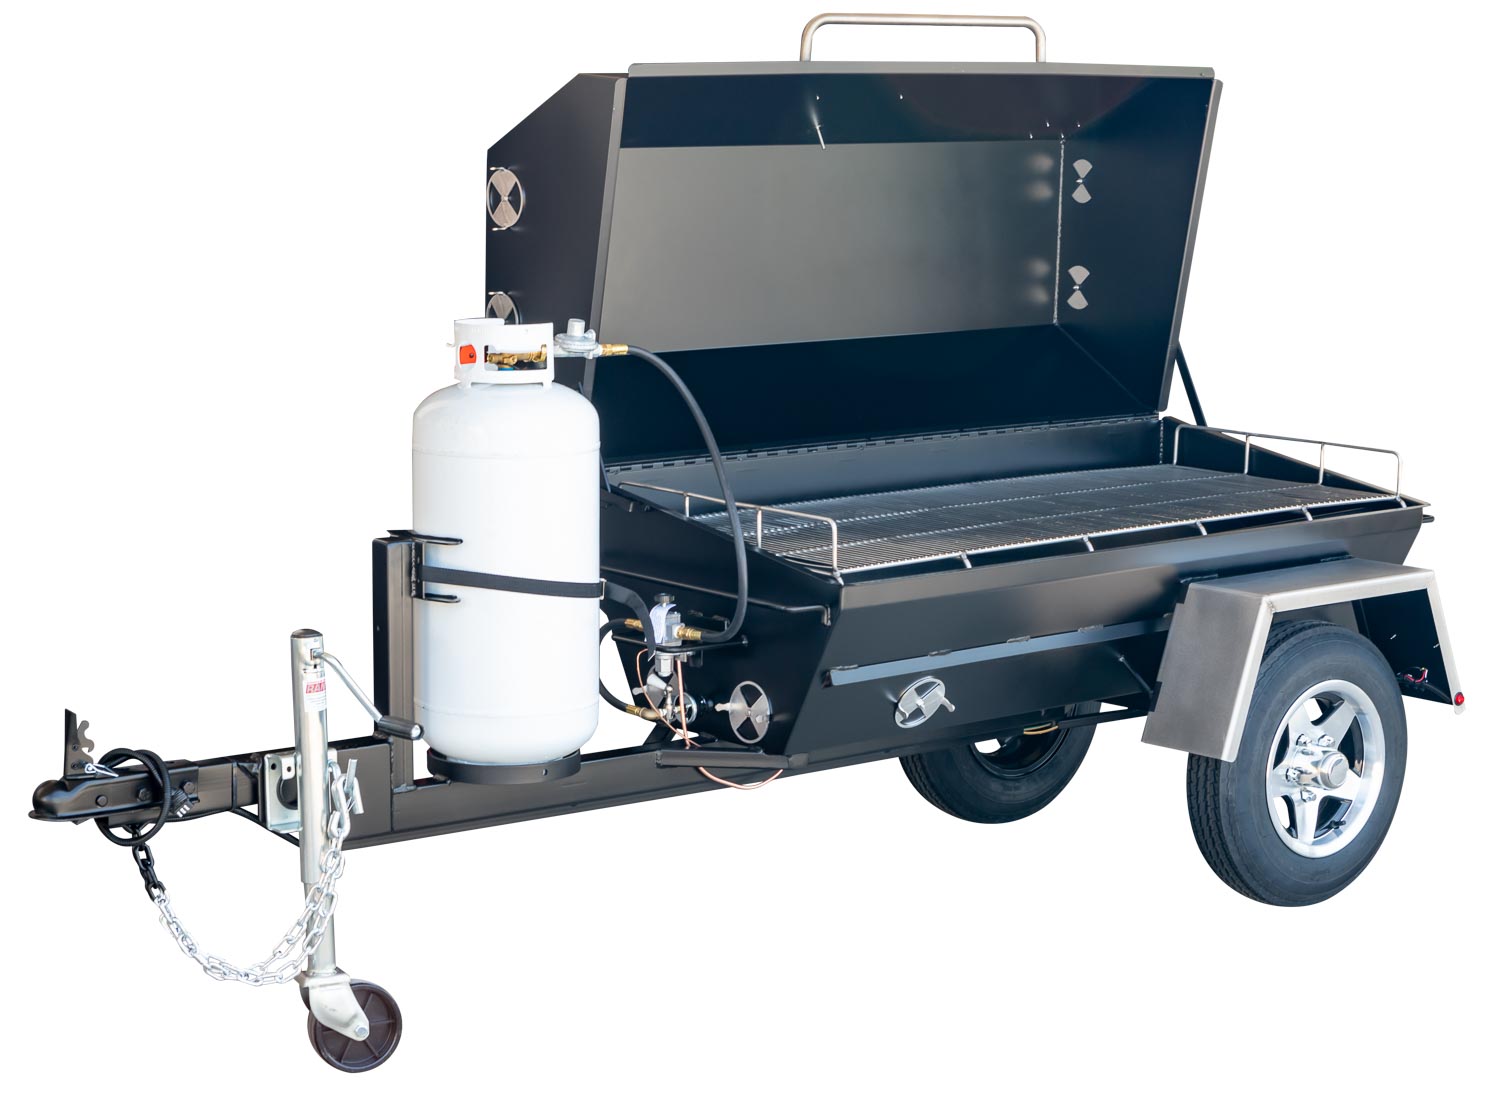 Tow Pig got a 60-gallon RDS transfer tank/toolbox combo and a new hitch,  the B&W Patriot 18k slider for our Cedar Creek 5'er. A leveling kit,  wheels, and tires and I'll be